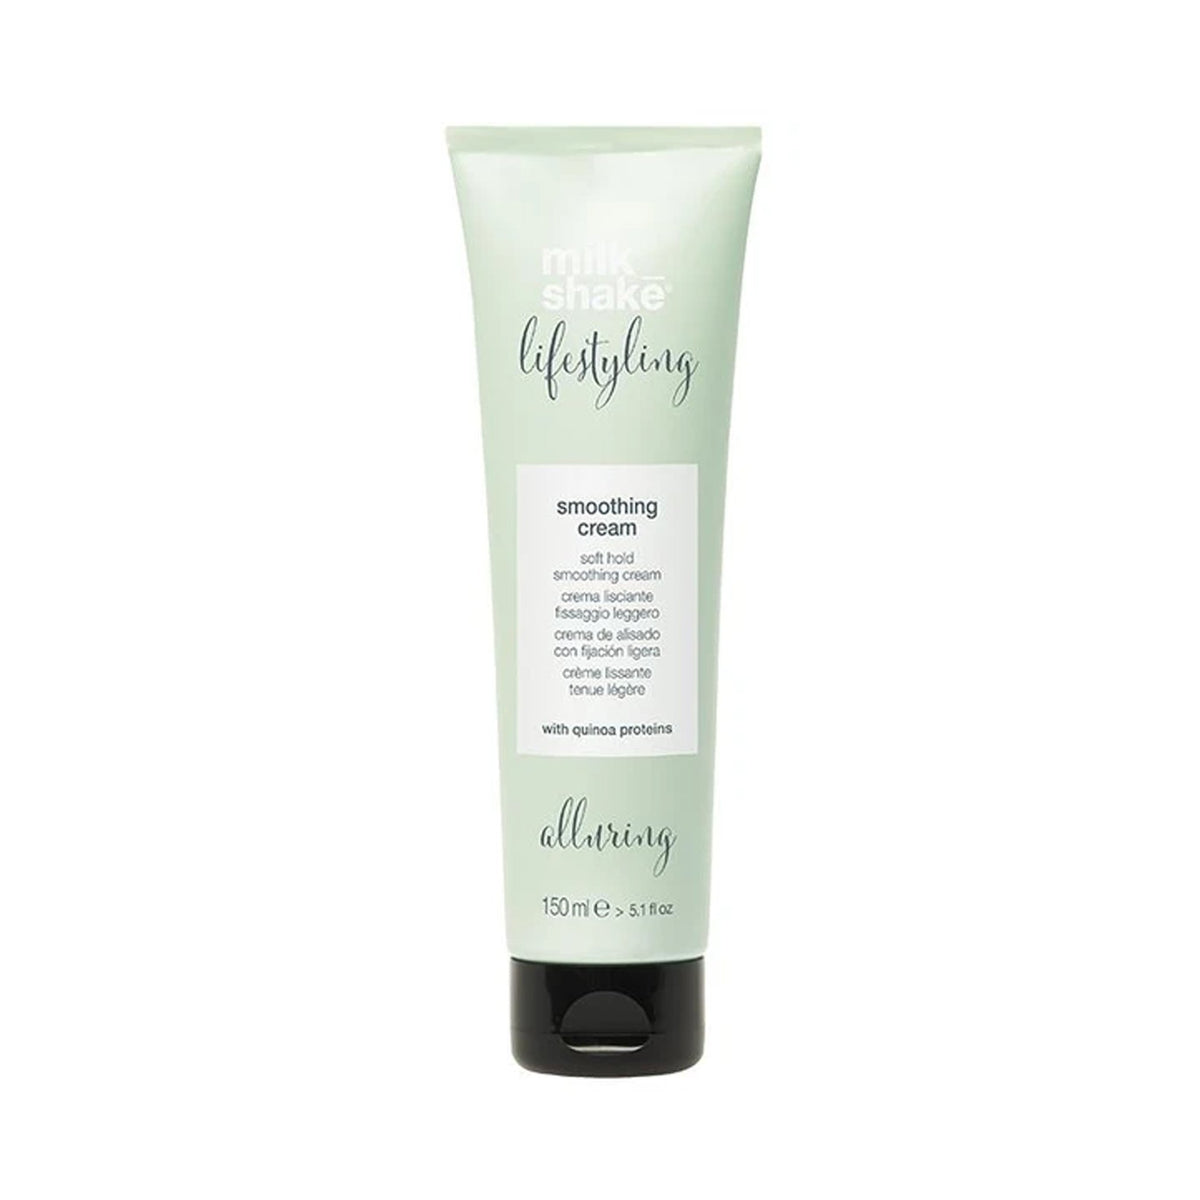 milk_shake Lifestyling Smoothing Cream - Haircare Superstore